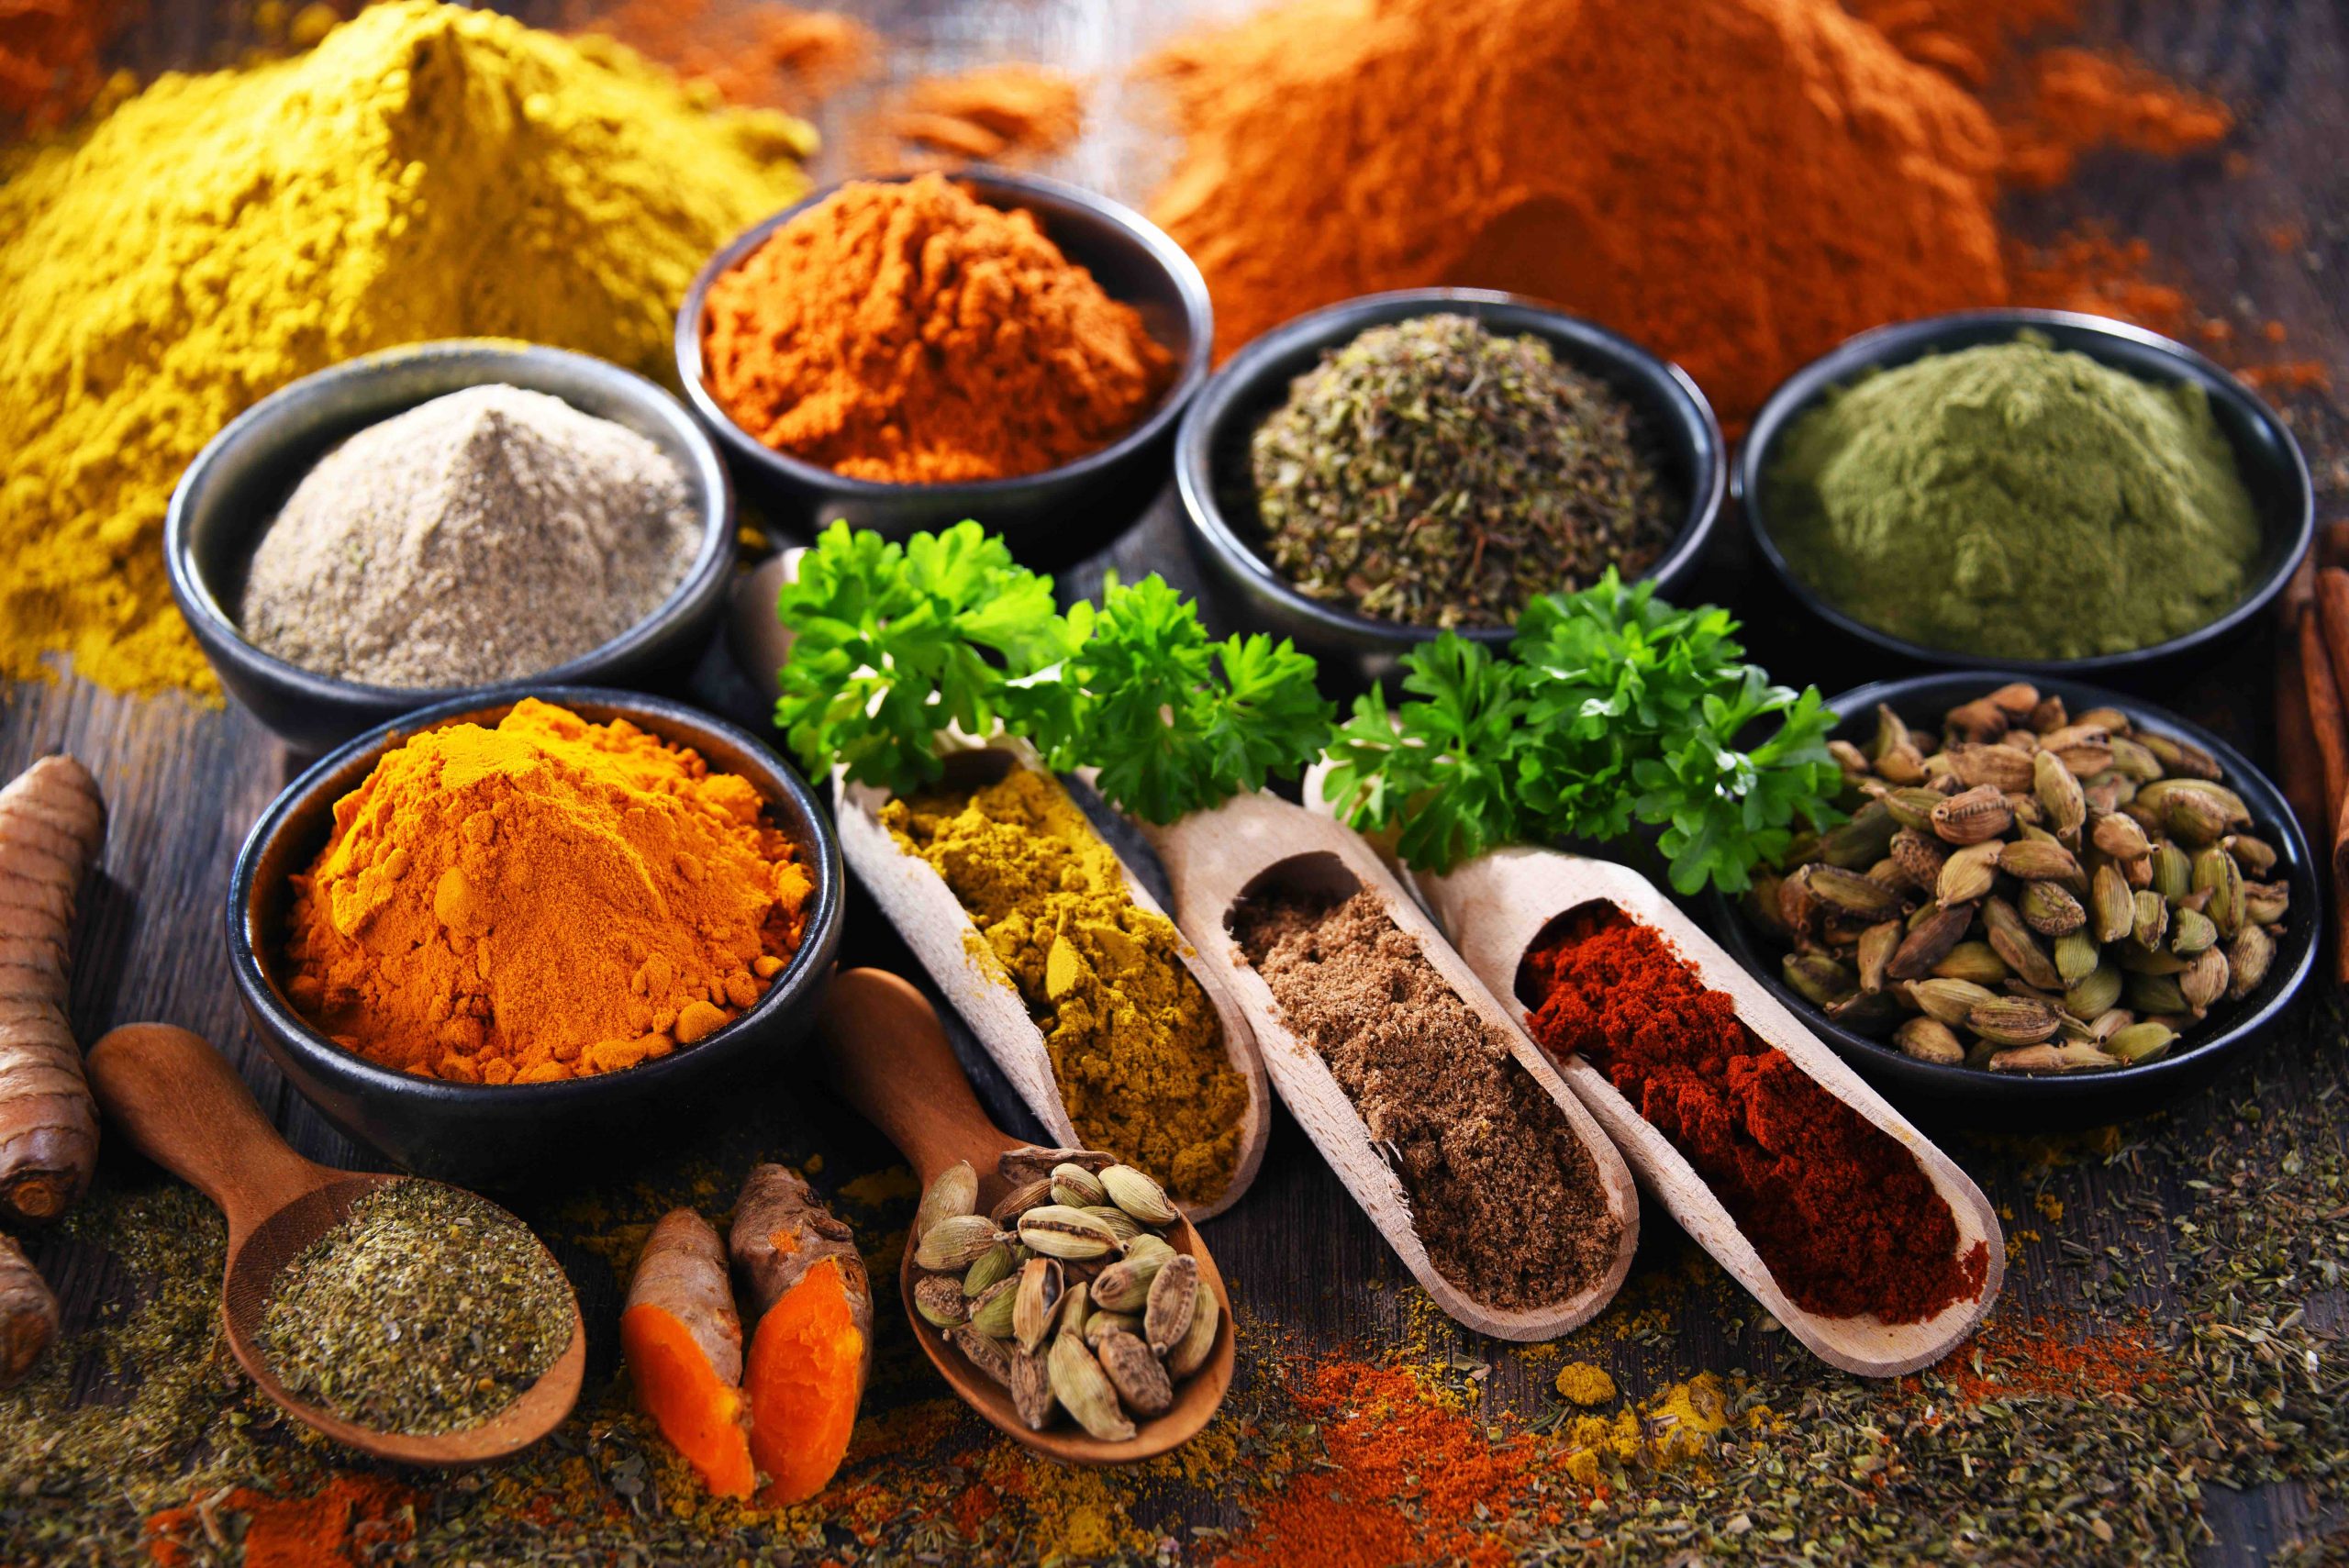 Manufacture of spices in South Africa